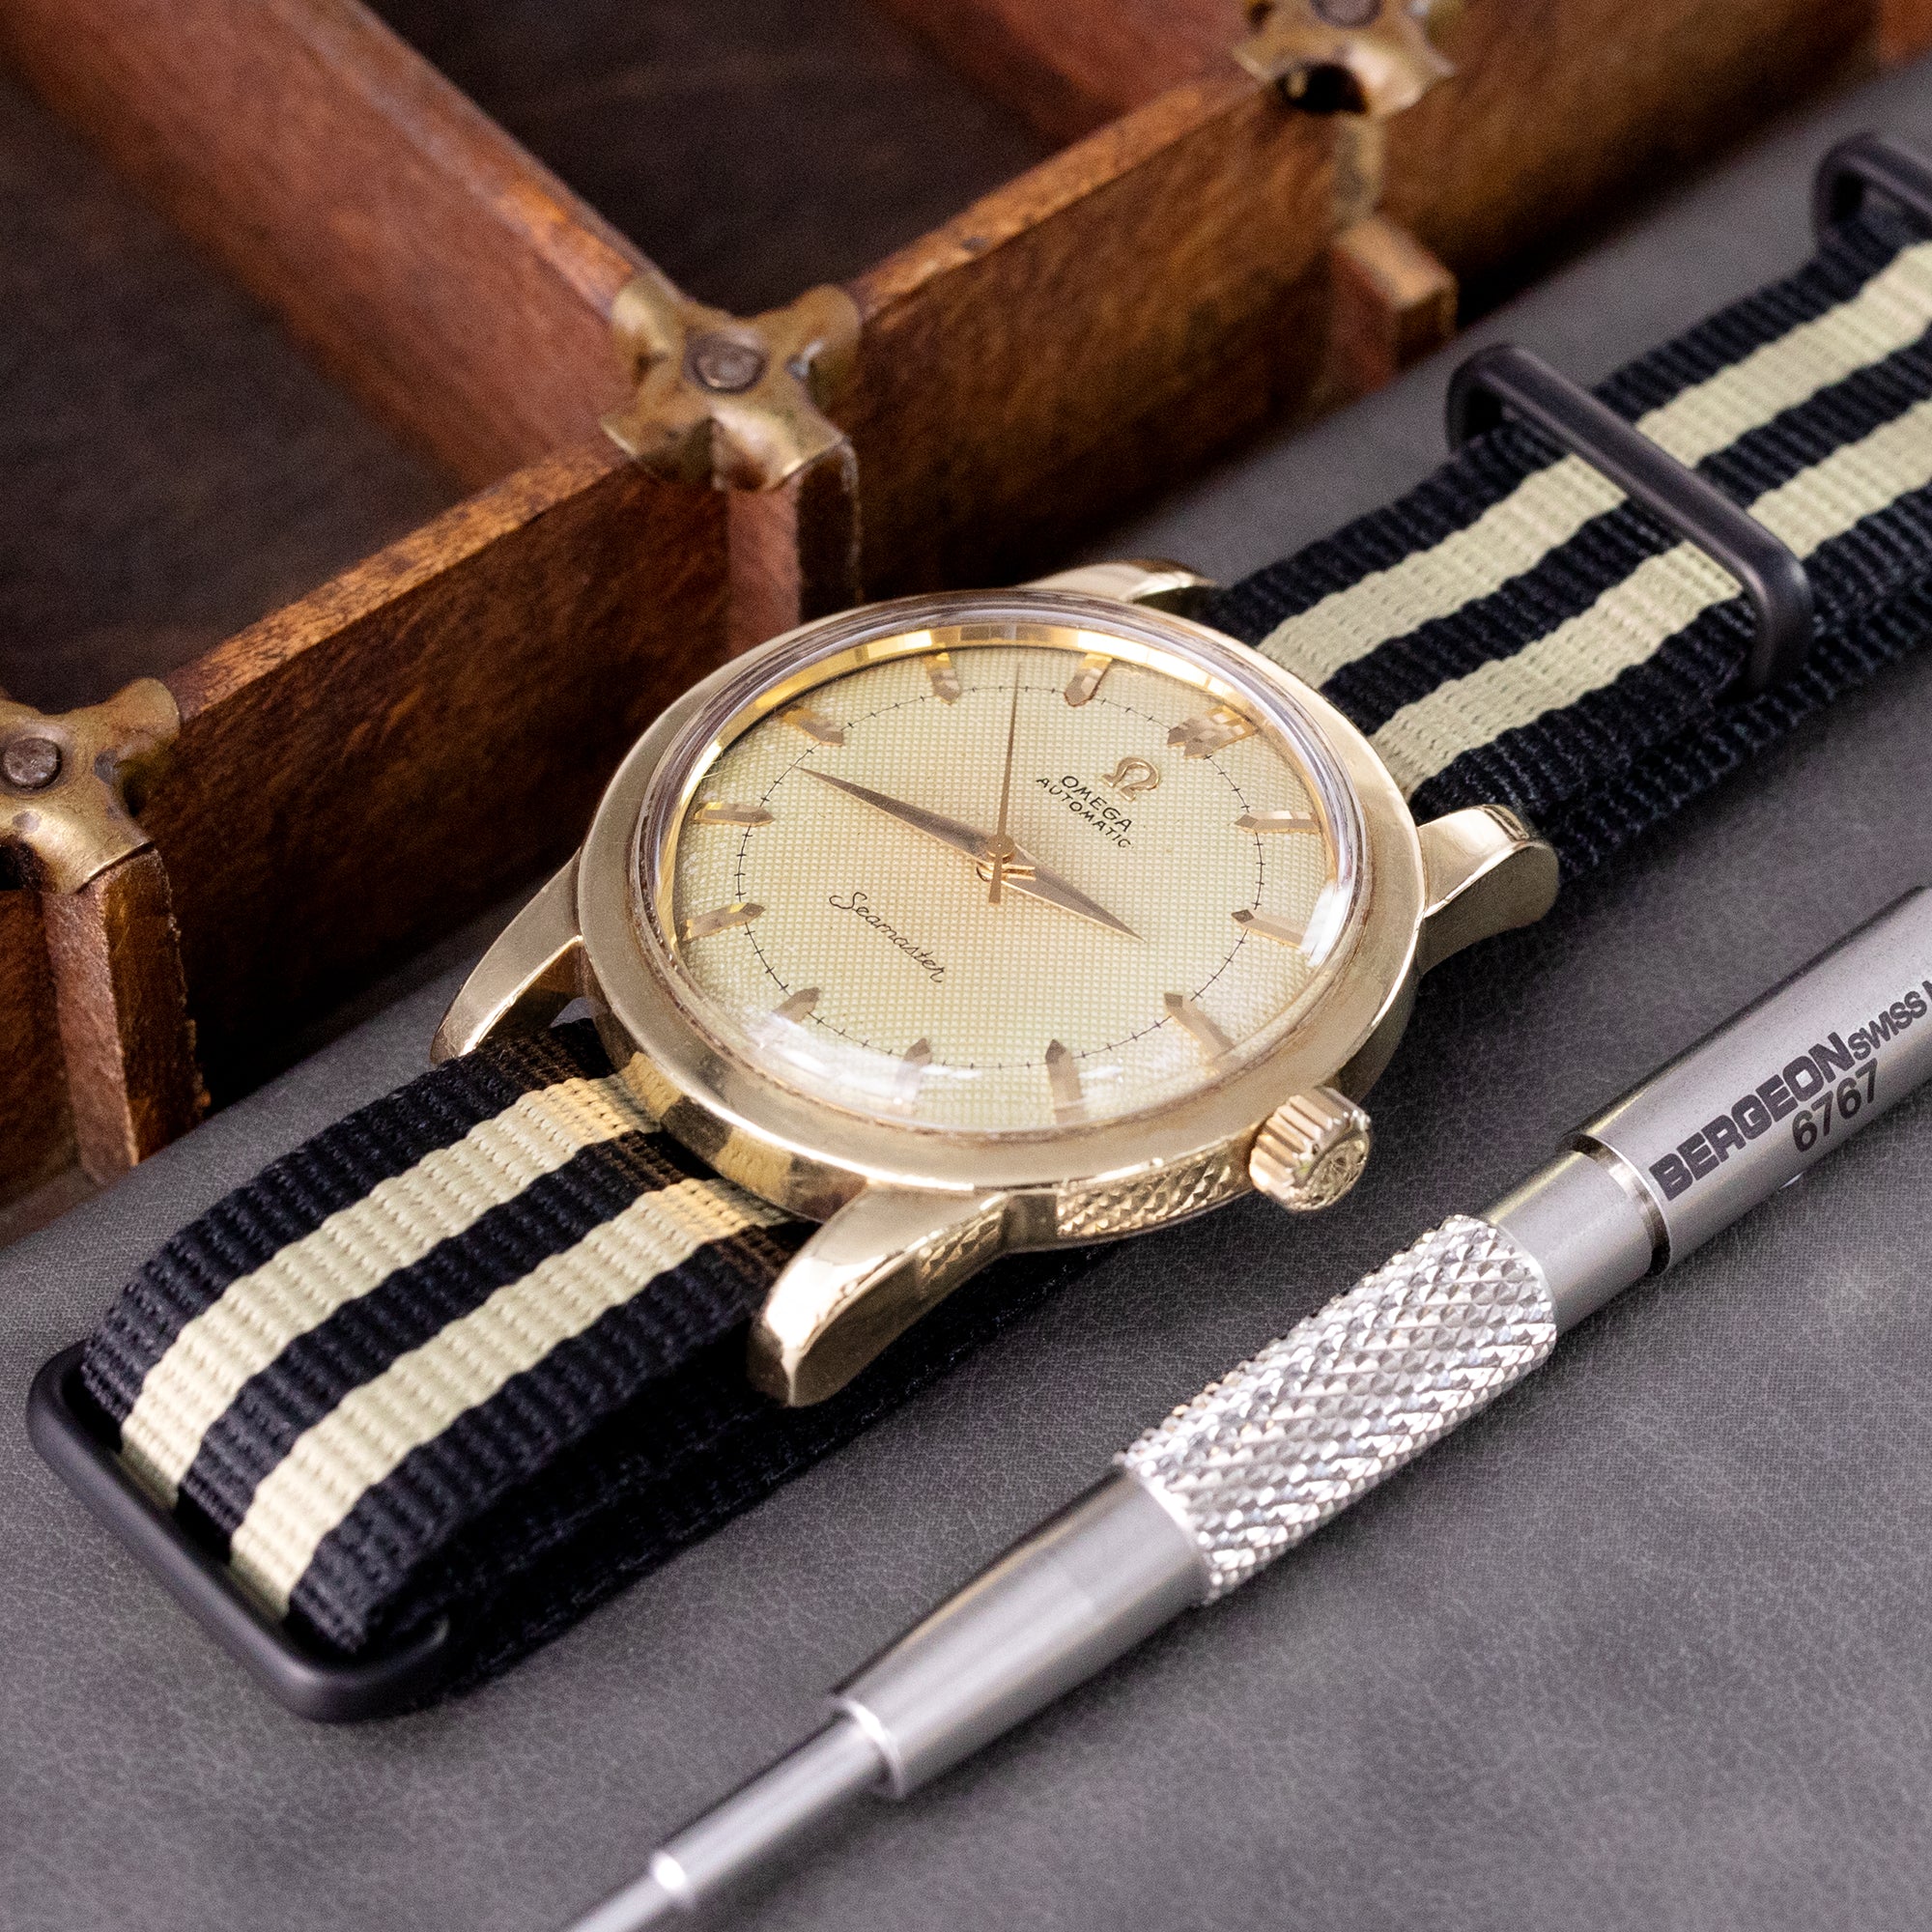 1952 Omega Gold Capped Seamaster Bumper Caliber 354 Honeycomb Dial  Nato watch band by Strapcode